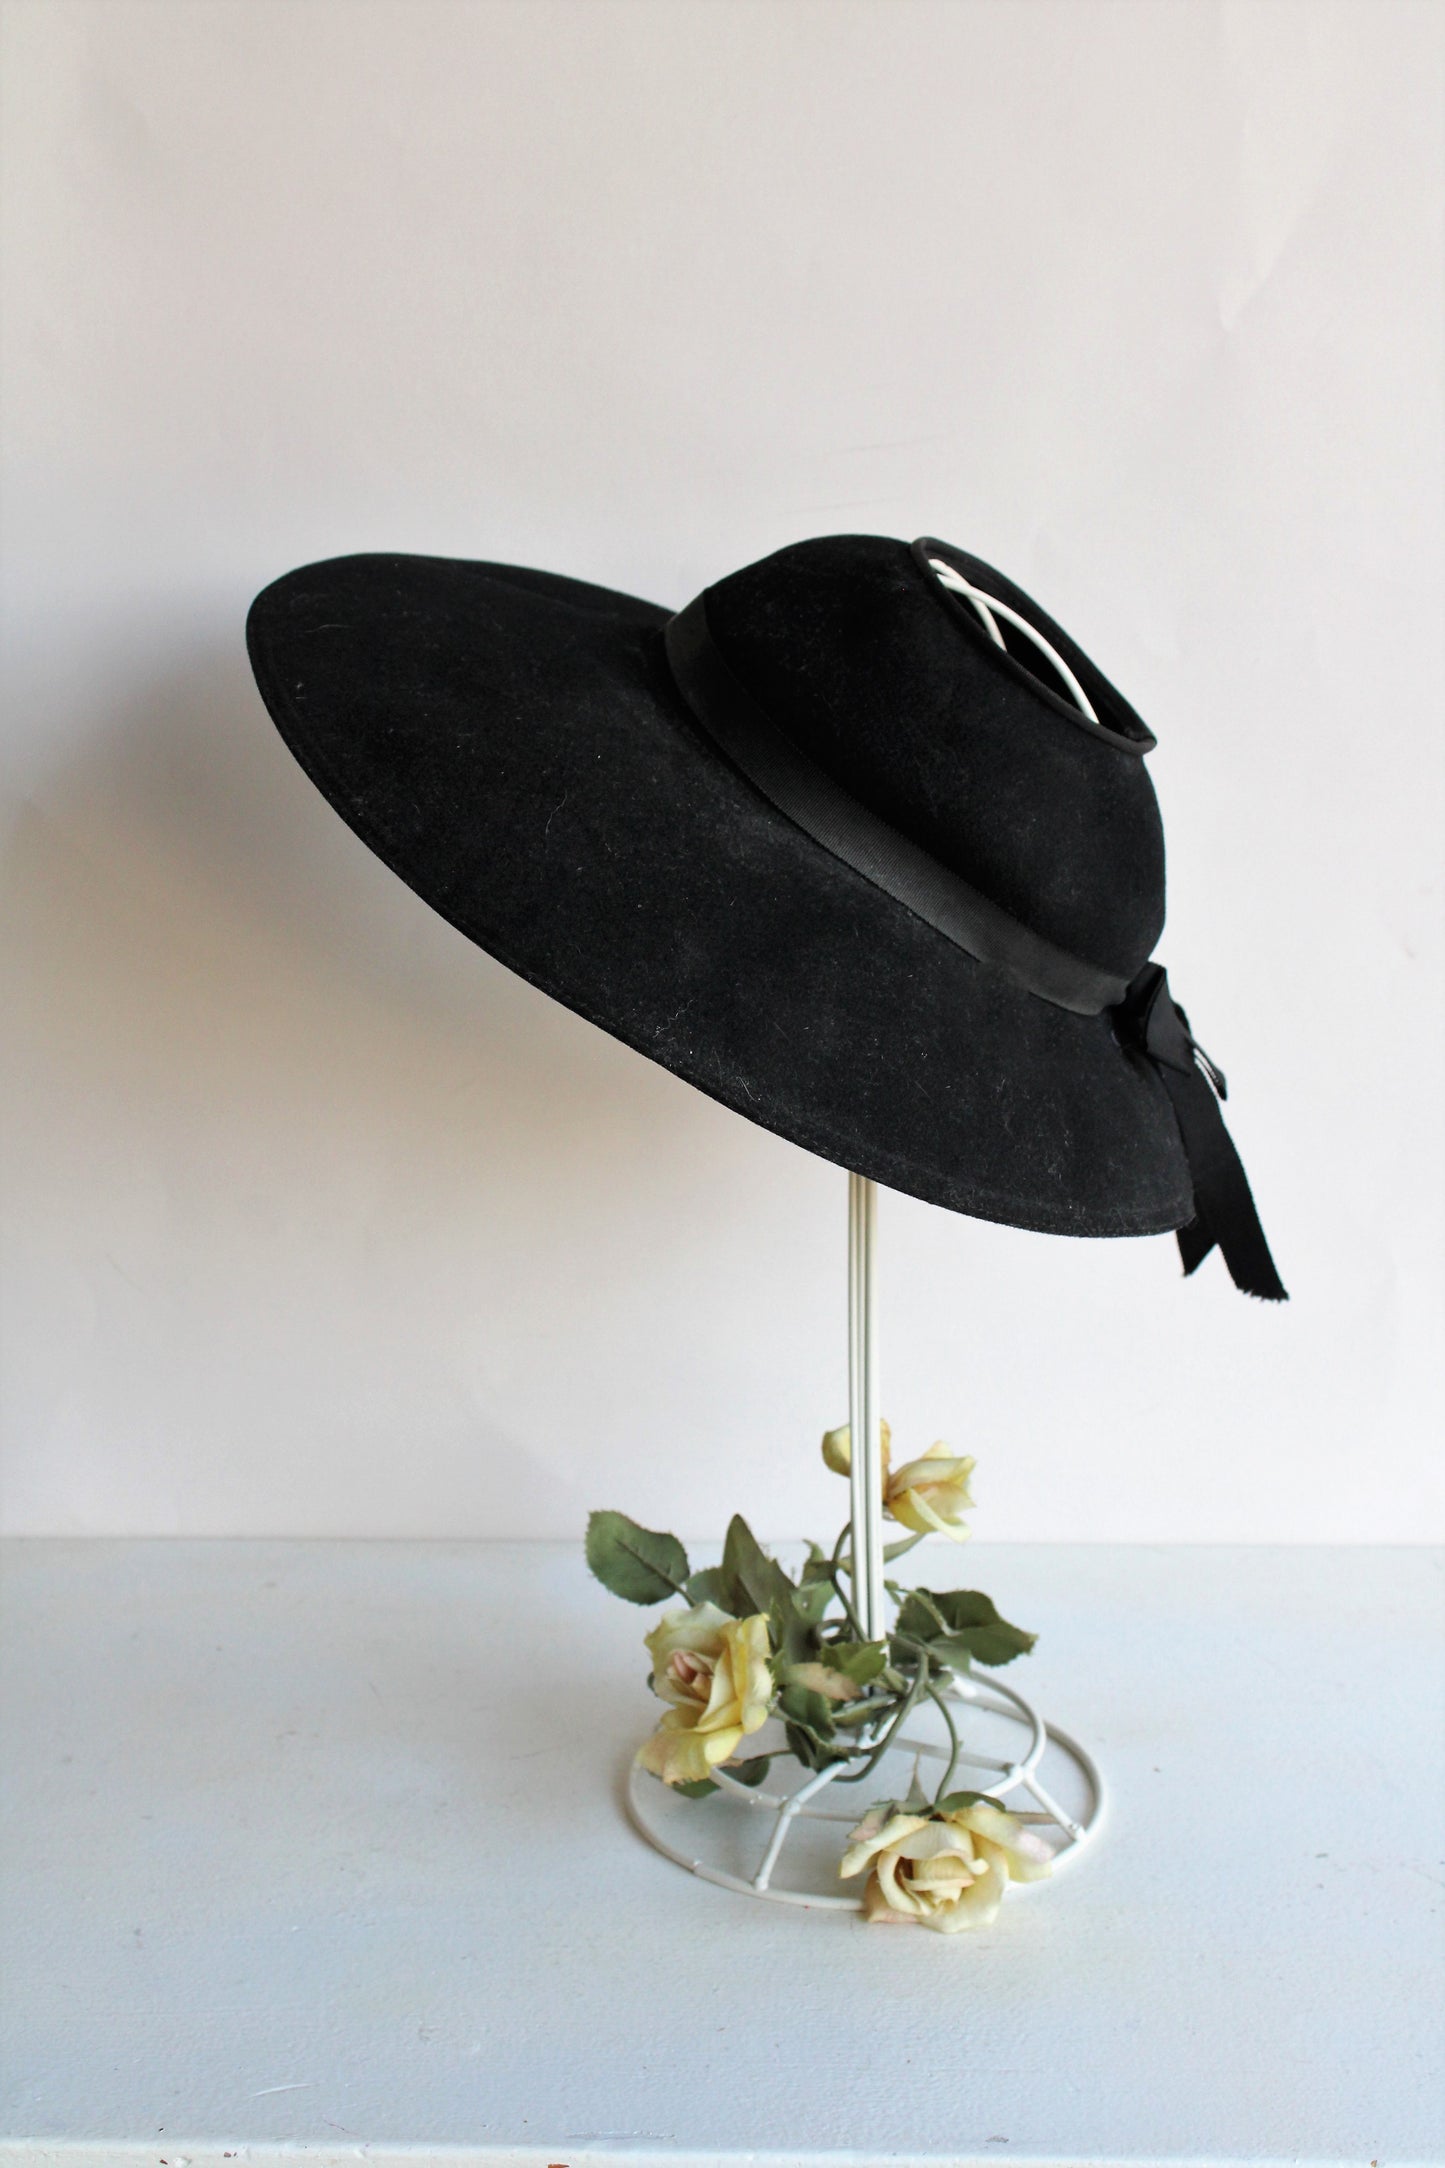 Vintage 1940s 1950s Wide Brimmed Black Hat with Open Crown by Merrimac